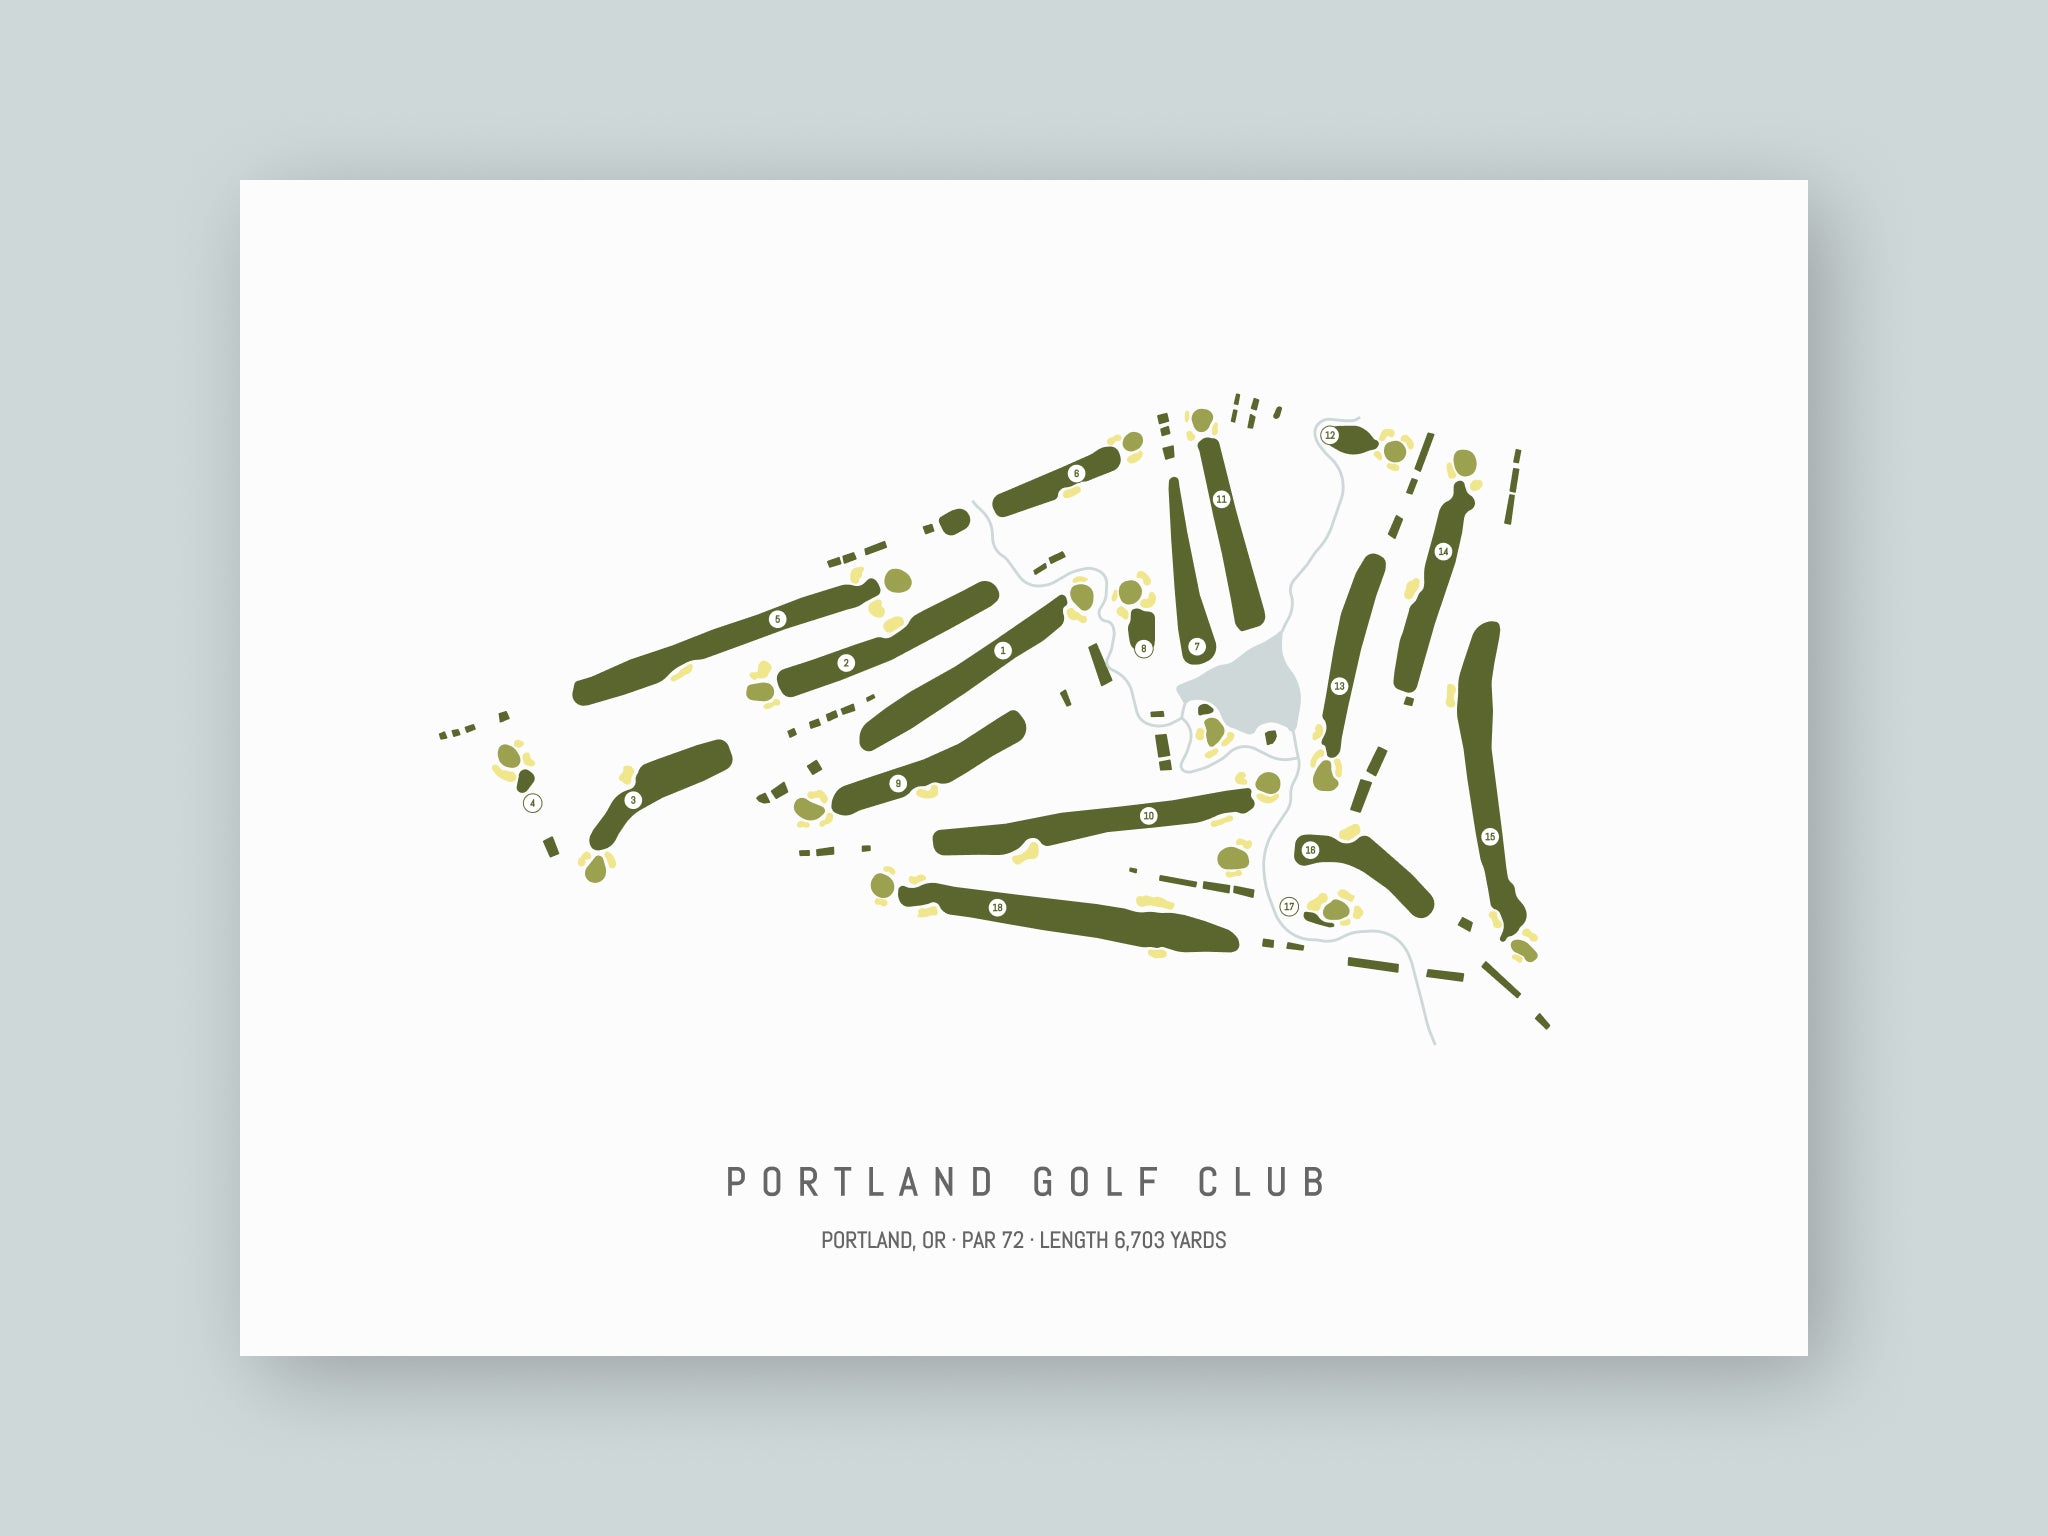 Portland-Golf-Club-OR--Unframed-24x18-With-Hole-Numbers